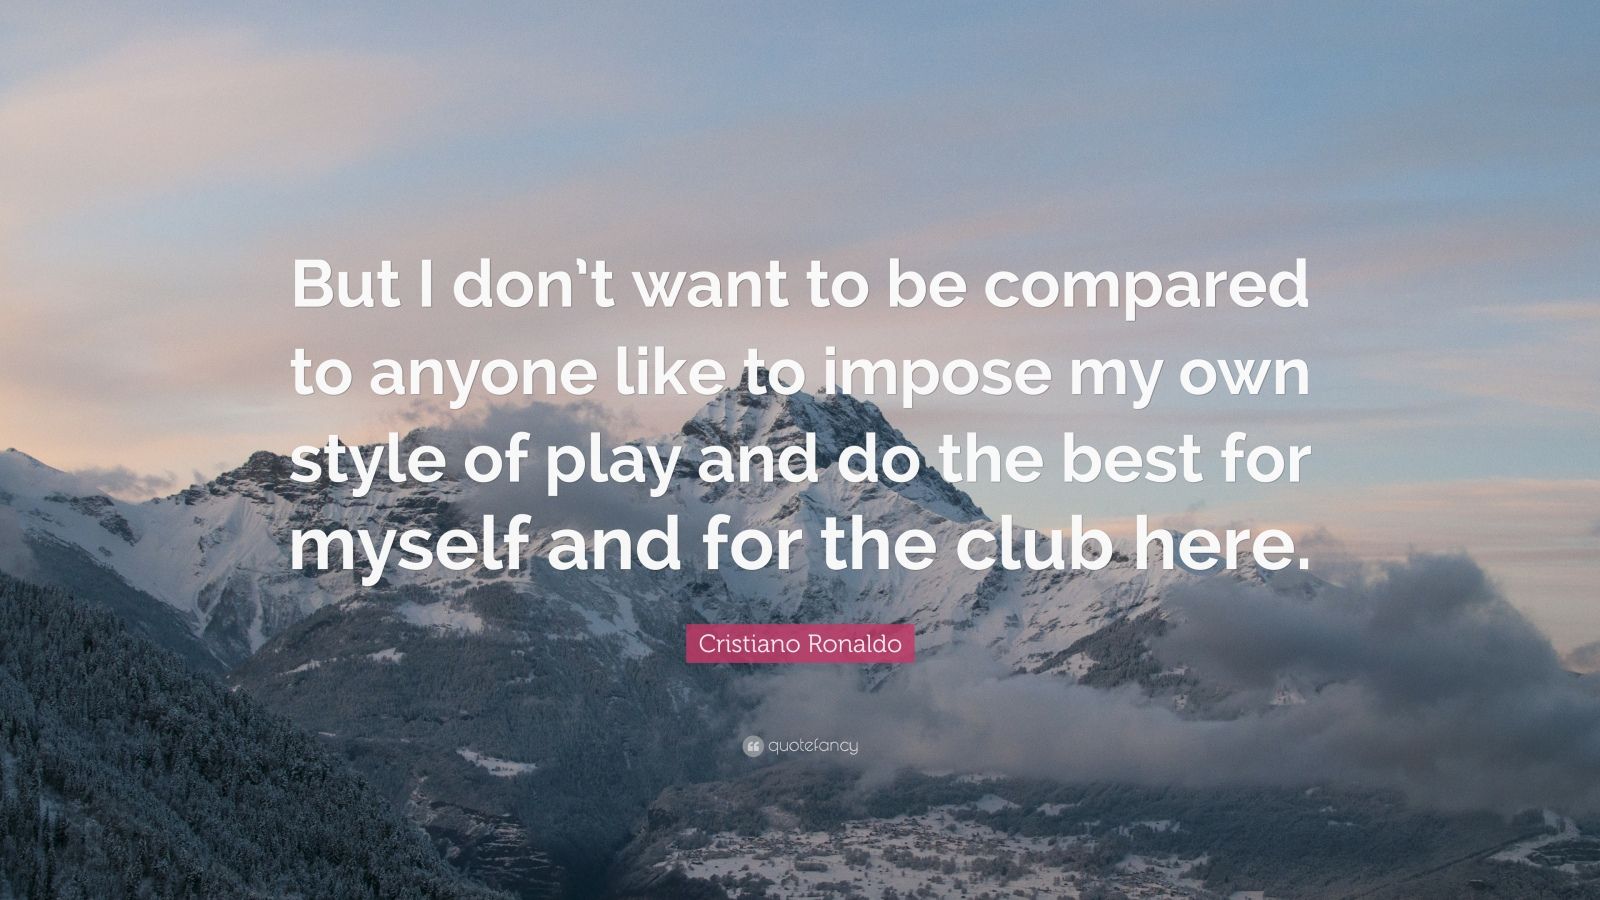 Cristiano Ronaldo Quote: “But I don’t want to be compared to anyone ...